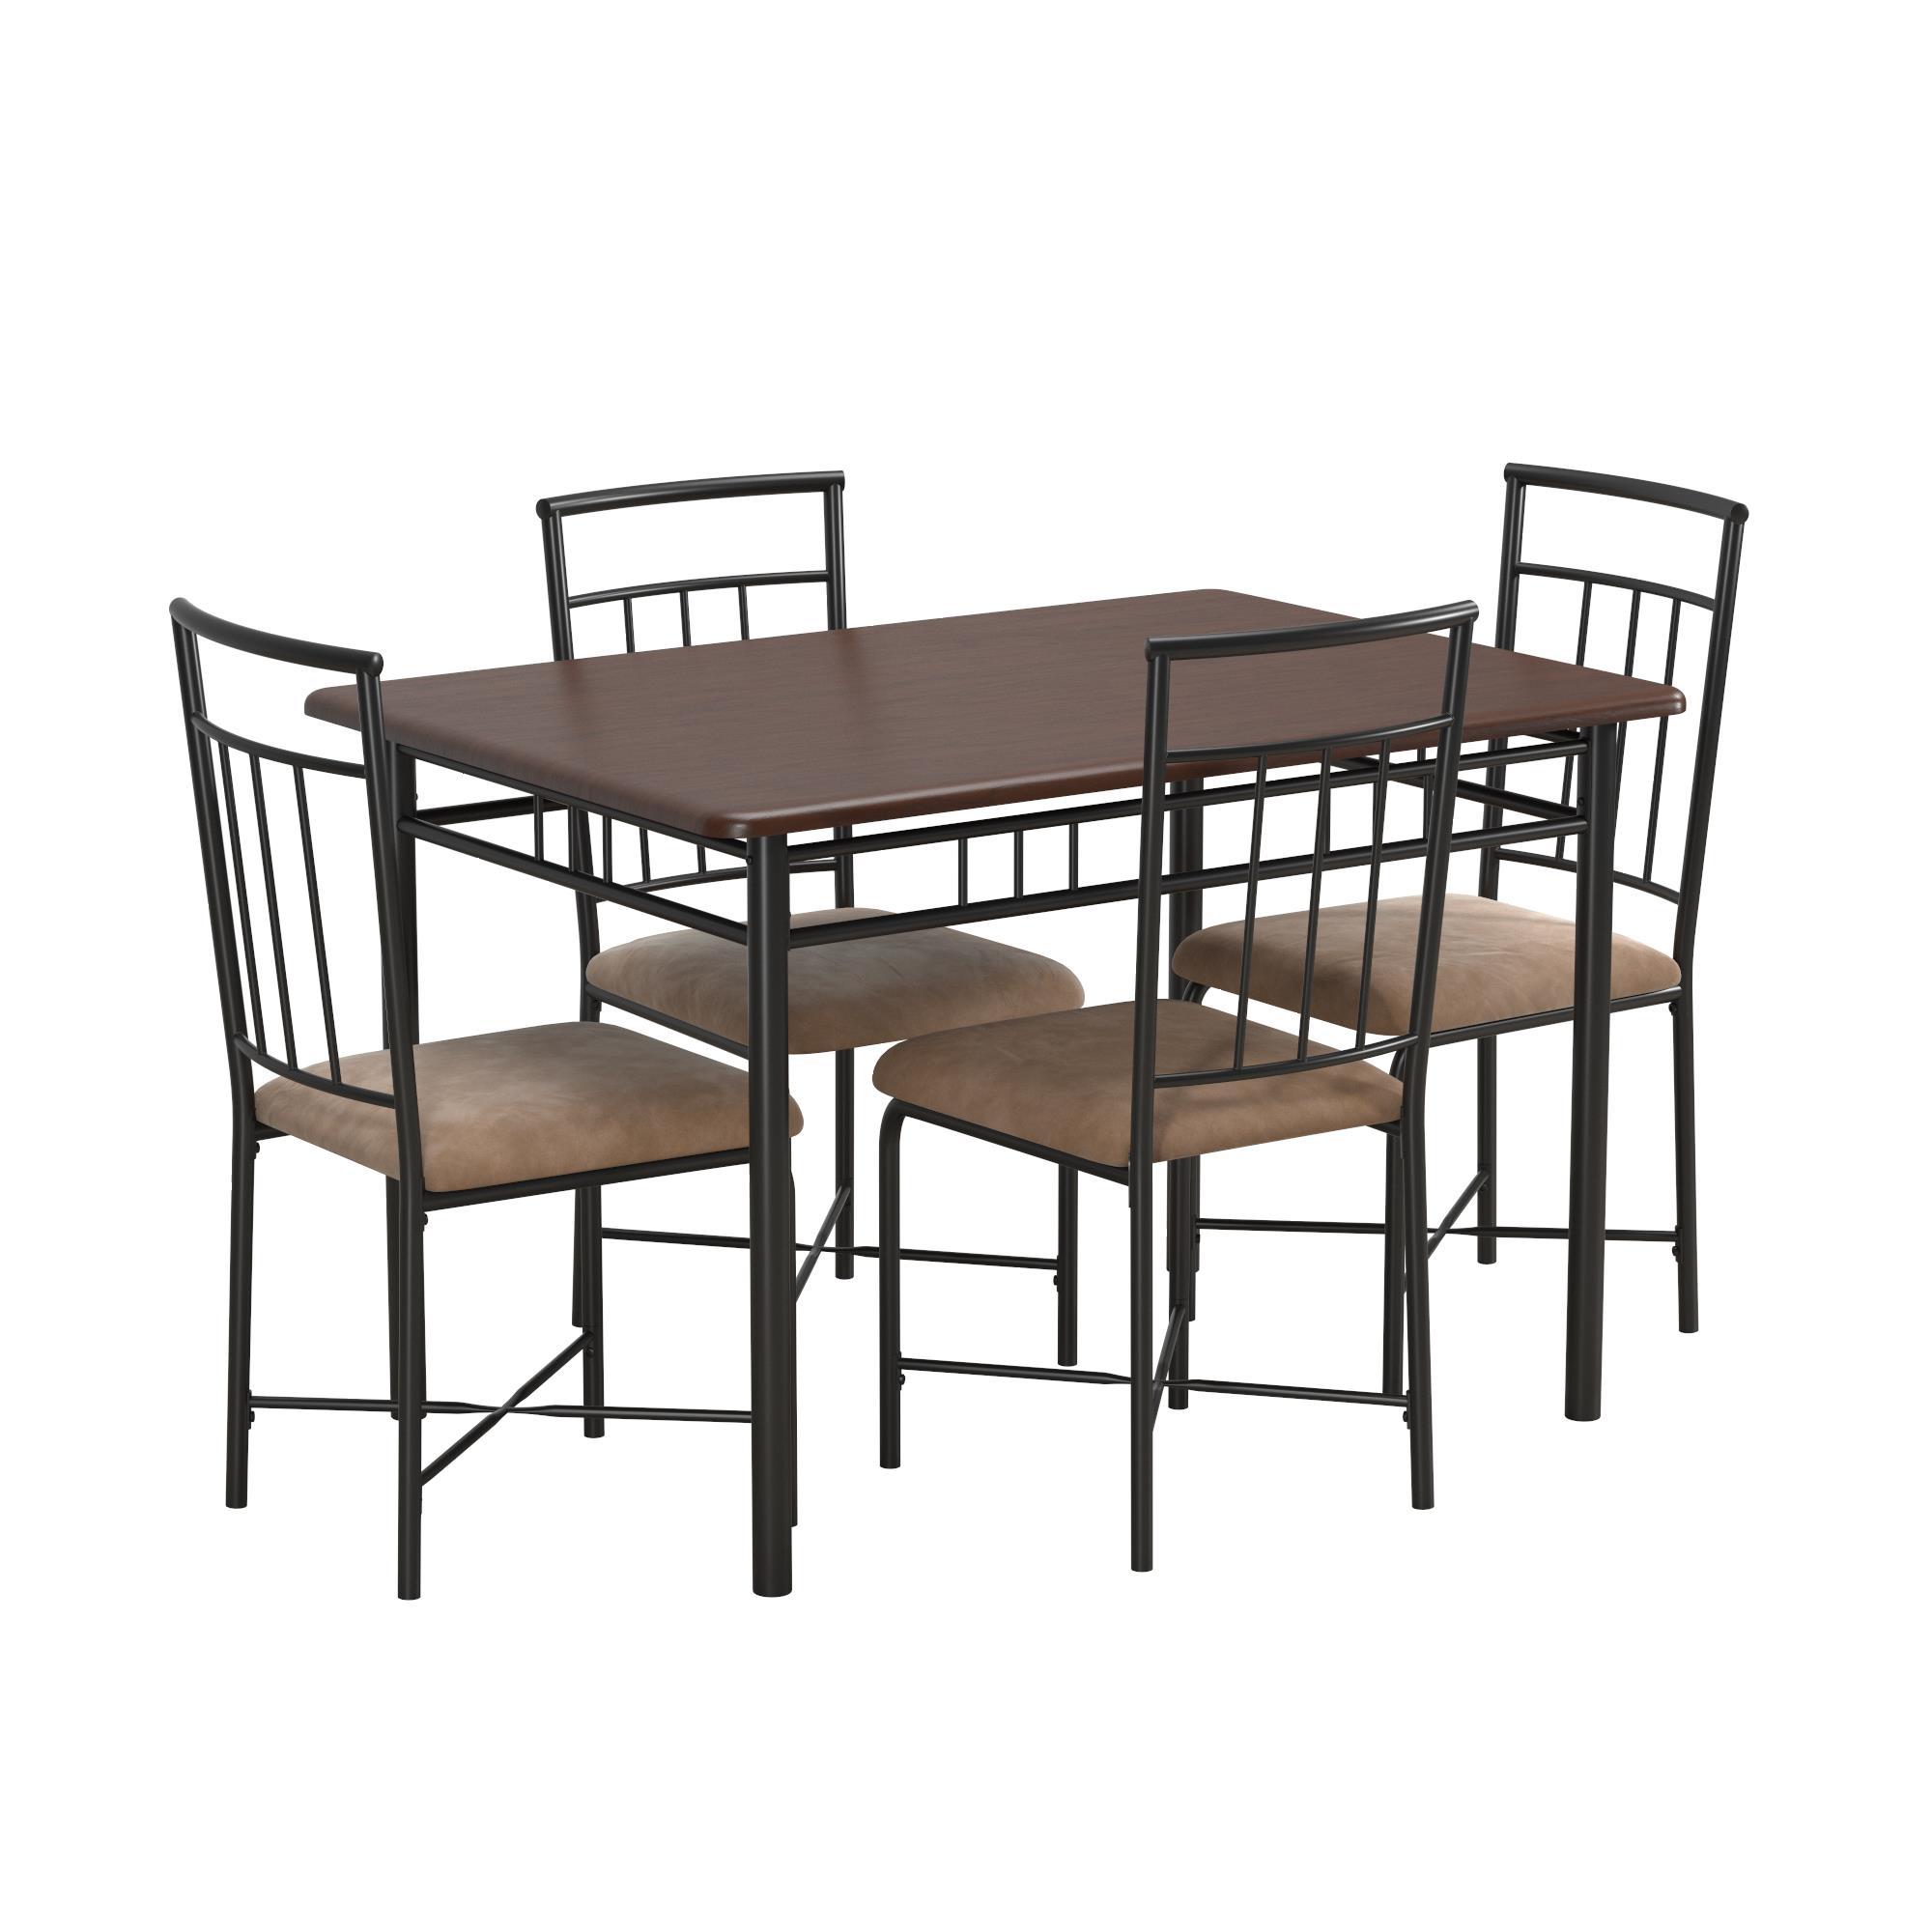 Mainstays Louise Traditional 5-Piece Wood & Metal Dining Set, Deep Walnut - image 8 of 22